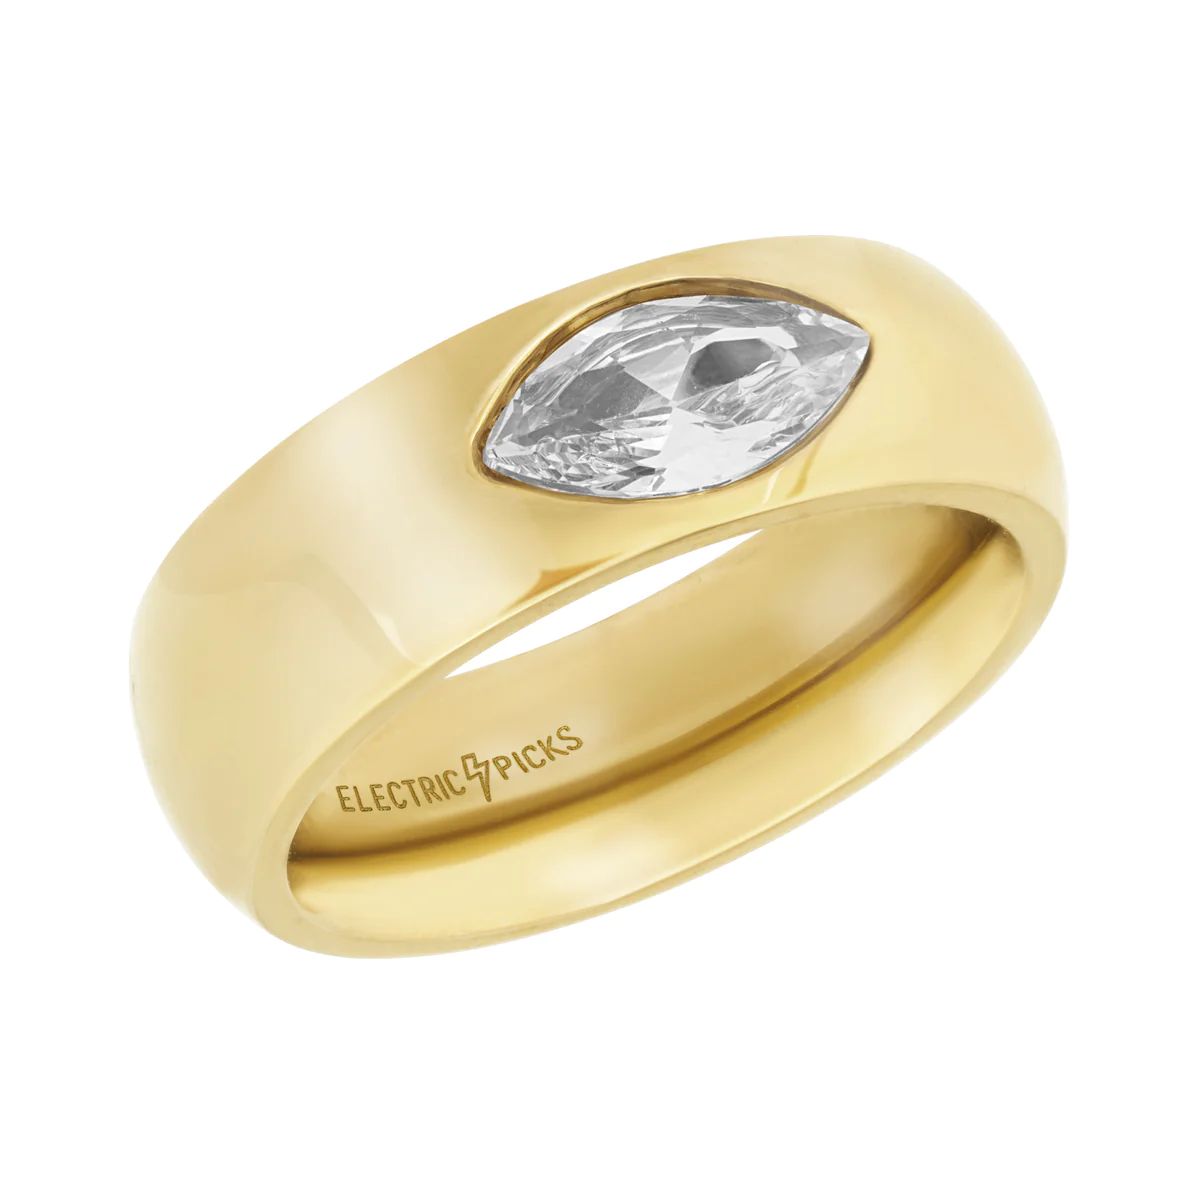 Bre Ring | Electric Picks Jewelry